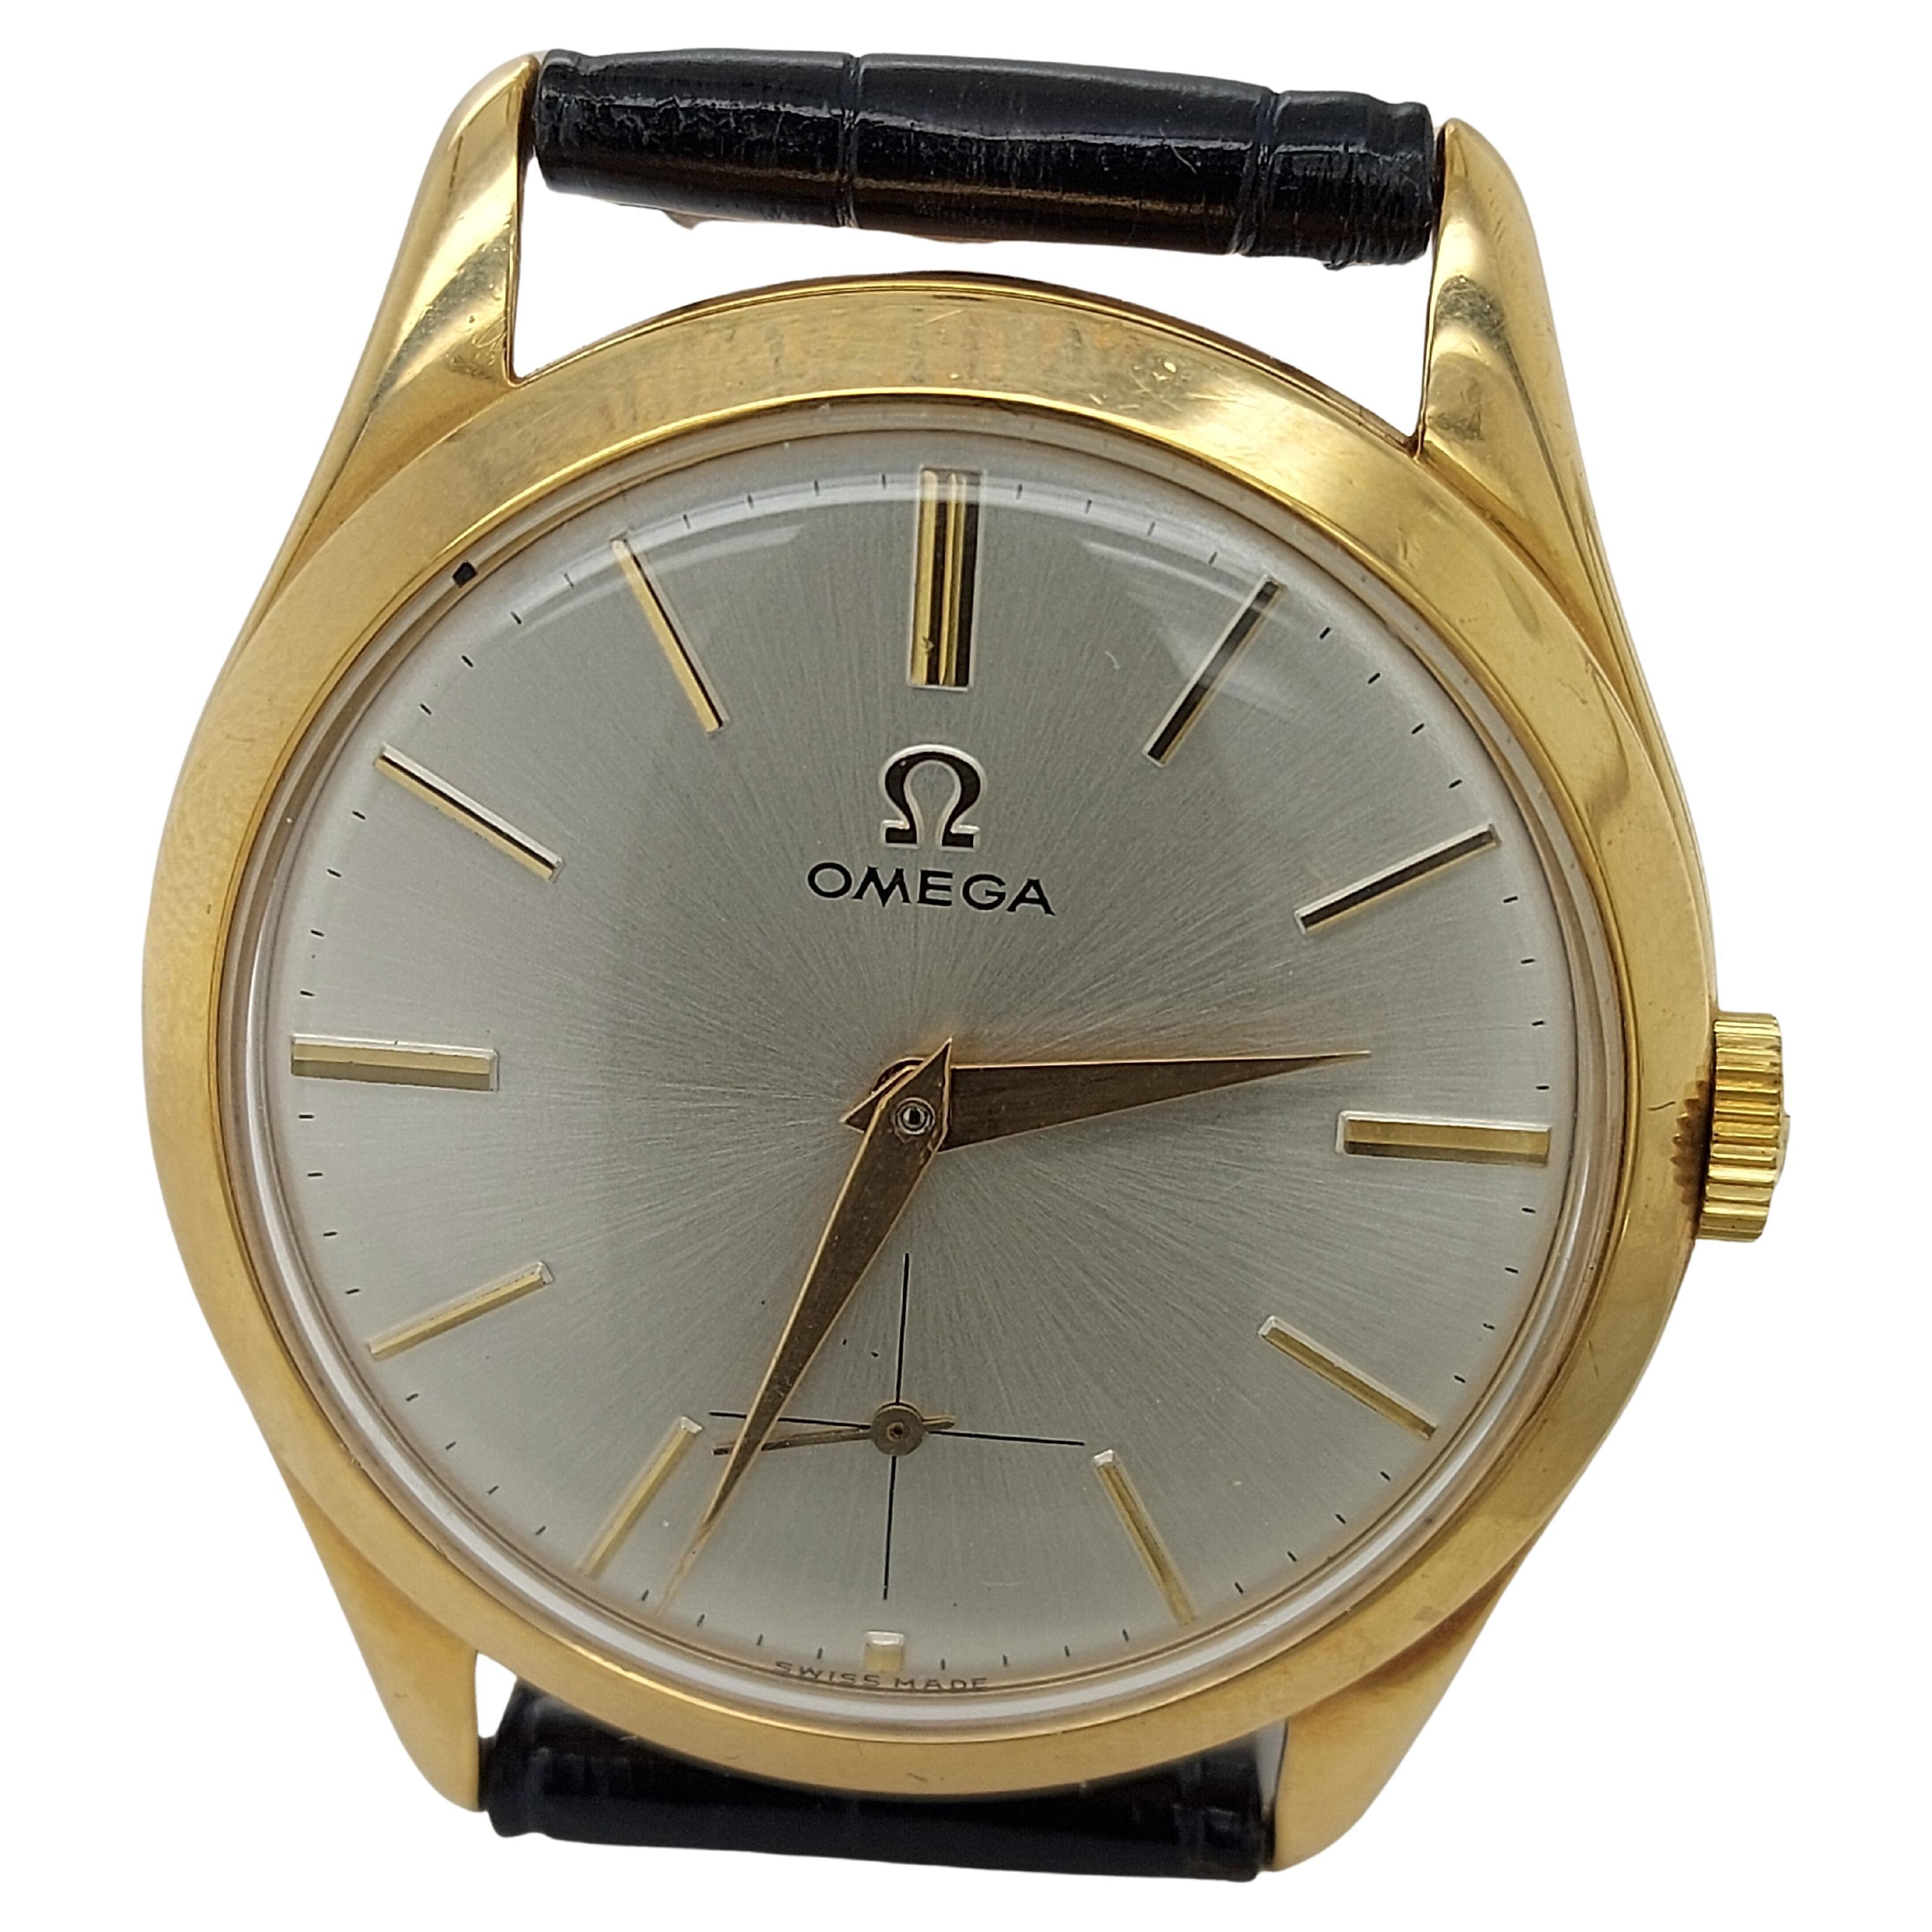 In Perfect Condition 18kt Yellow Gold Omega Reference 2619, Mechanical Movement, 

Functions: Hours, Minutes, 

Movement: Mechanical movement - Calibre 265

Case: 18kt Yellow gold case, diameter 35.5 mm, thickness 9.6 mm, pressure closure case